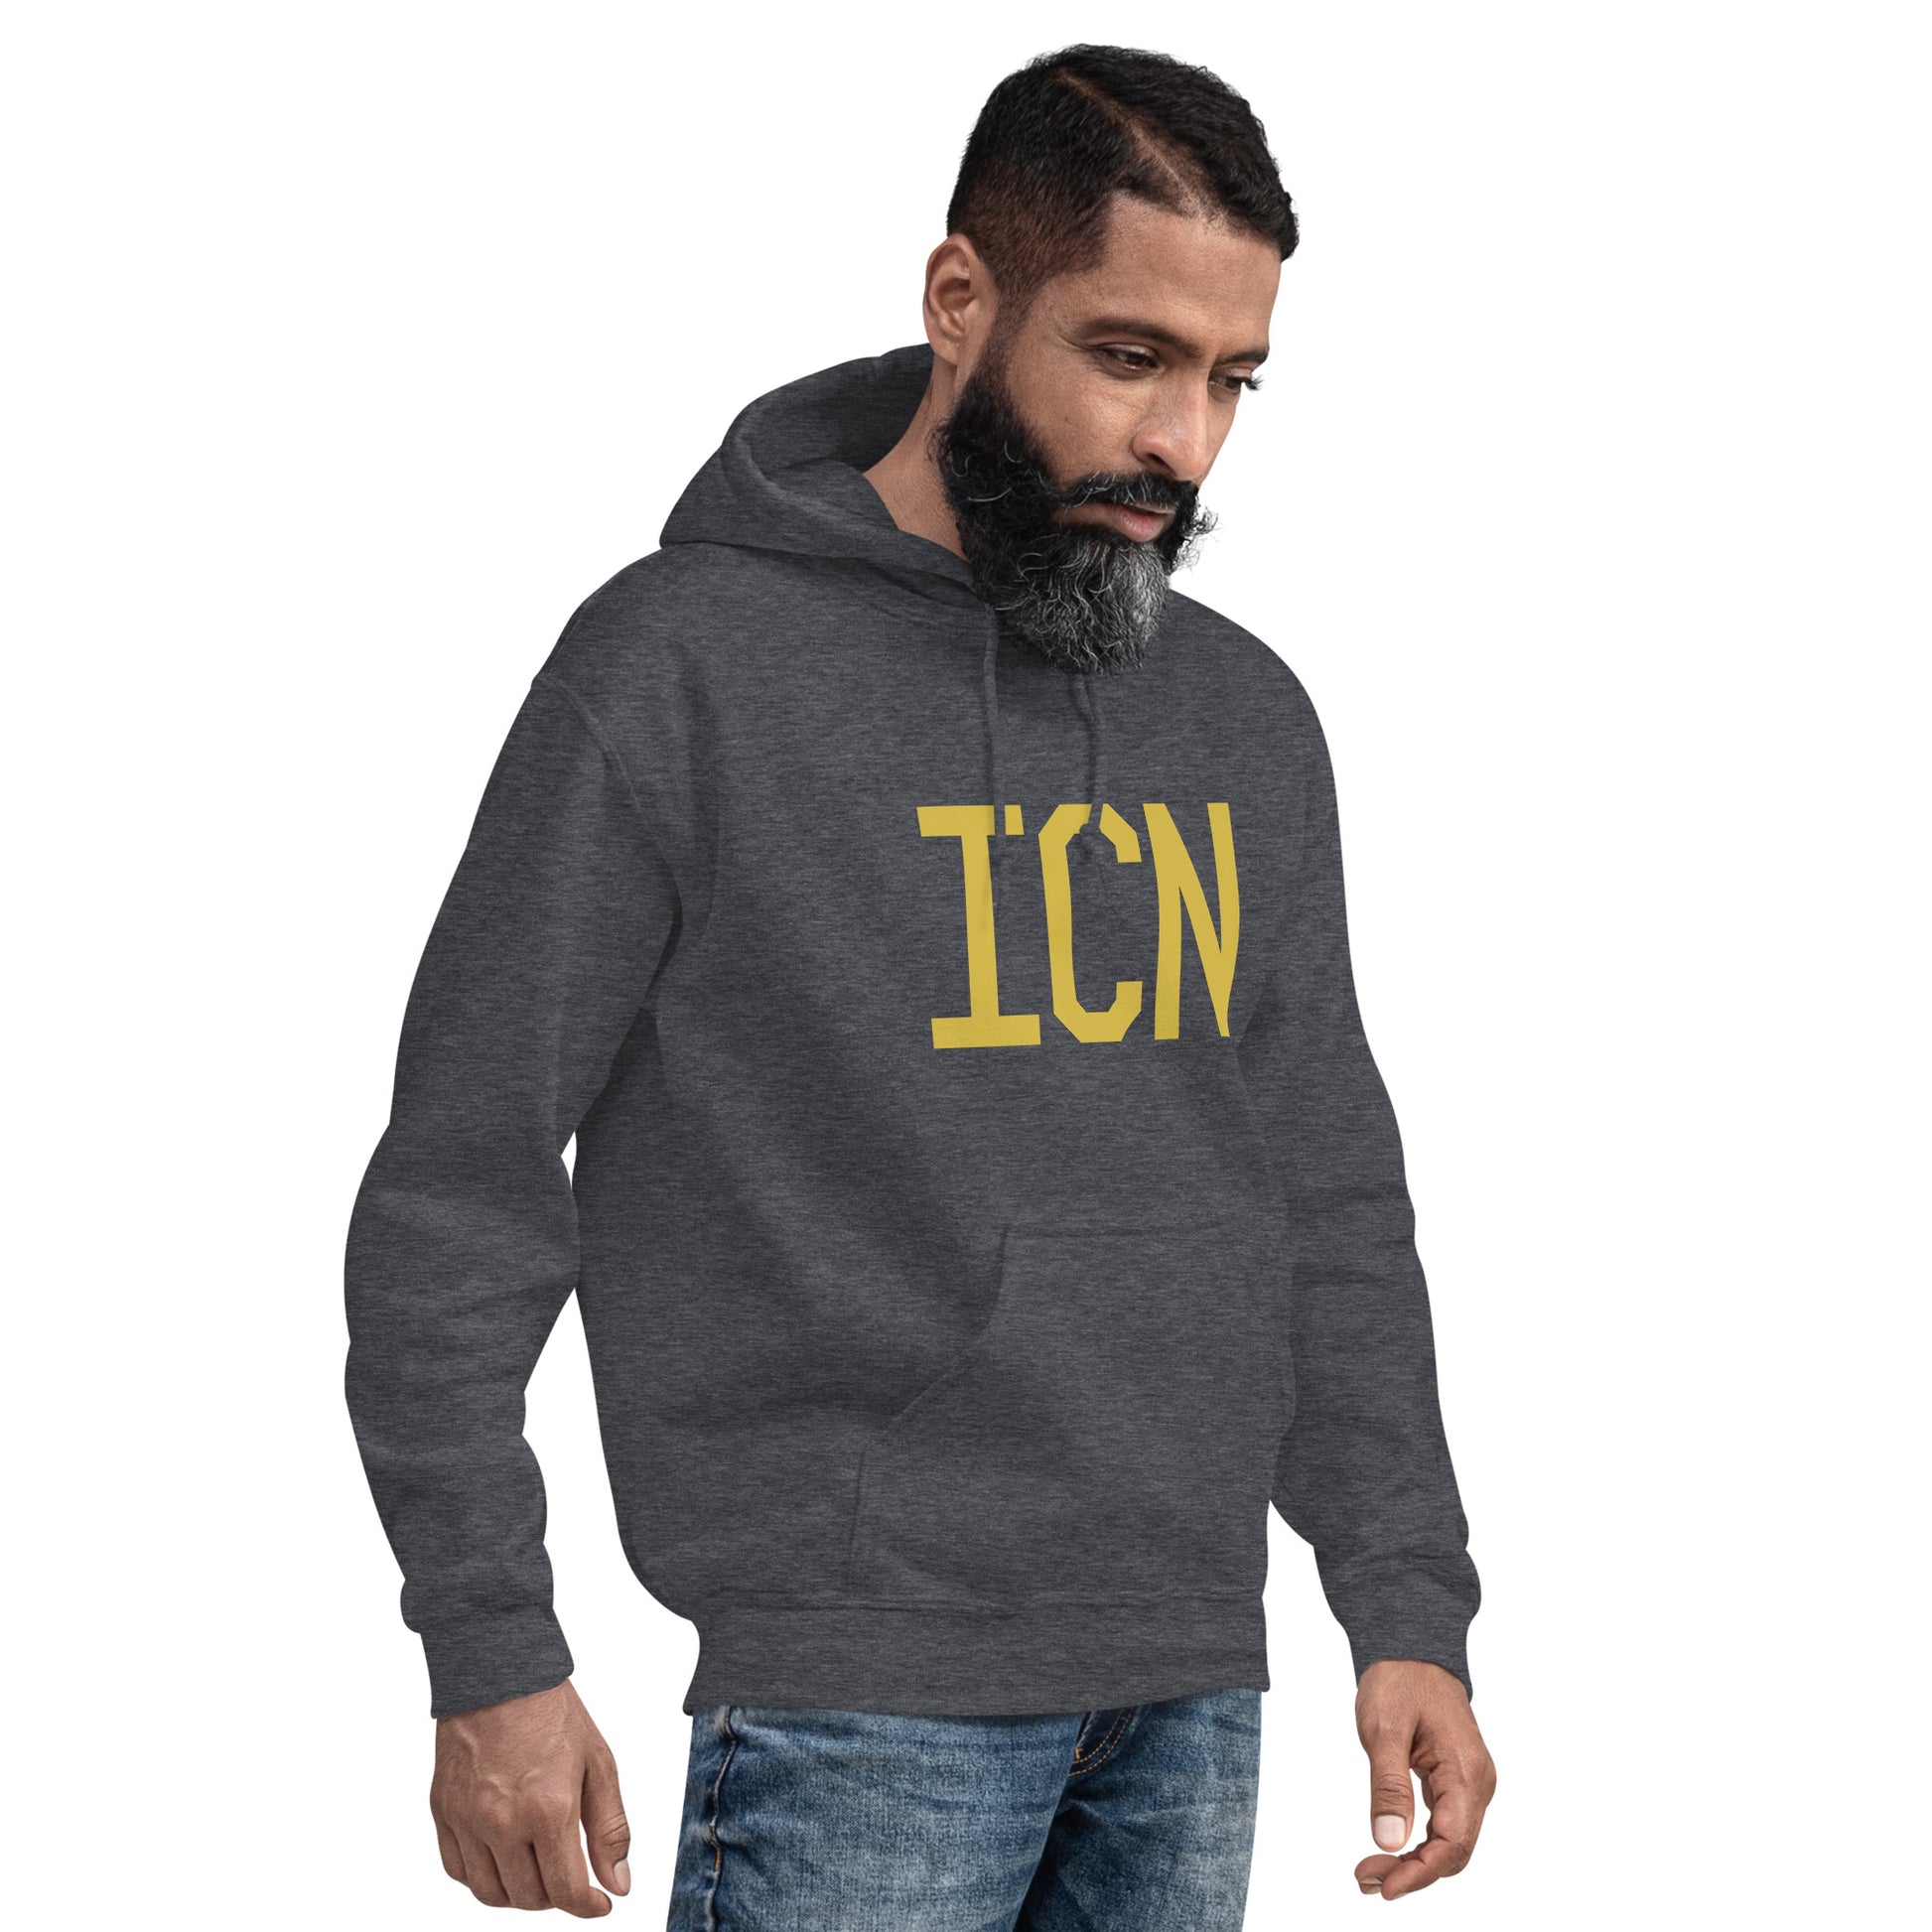 Aviation Gift Unisex Hoodie - Old Gold Graphic • ICN Seoul • YHM Designs - Image 06